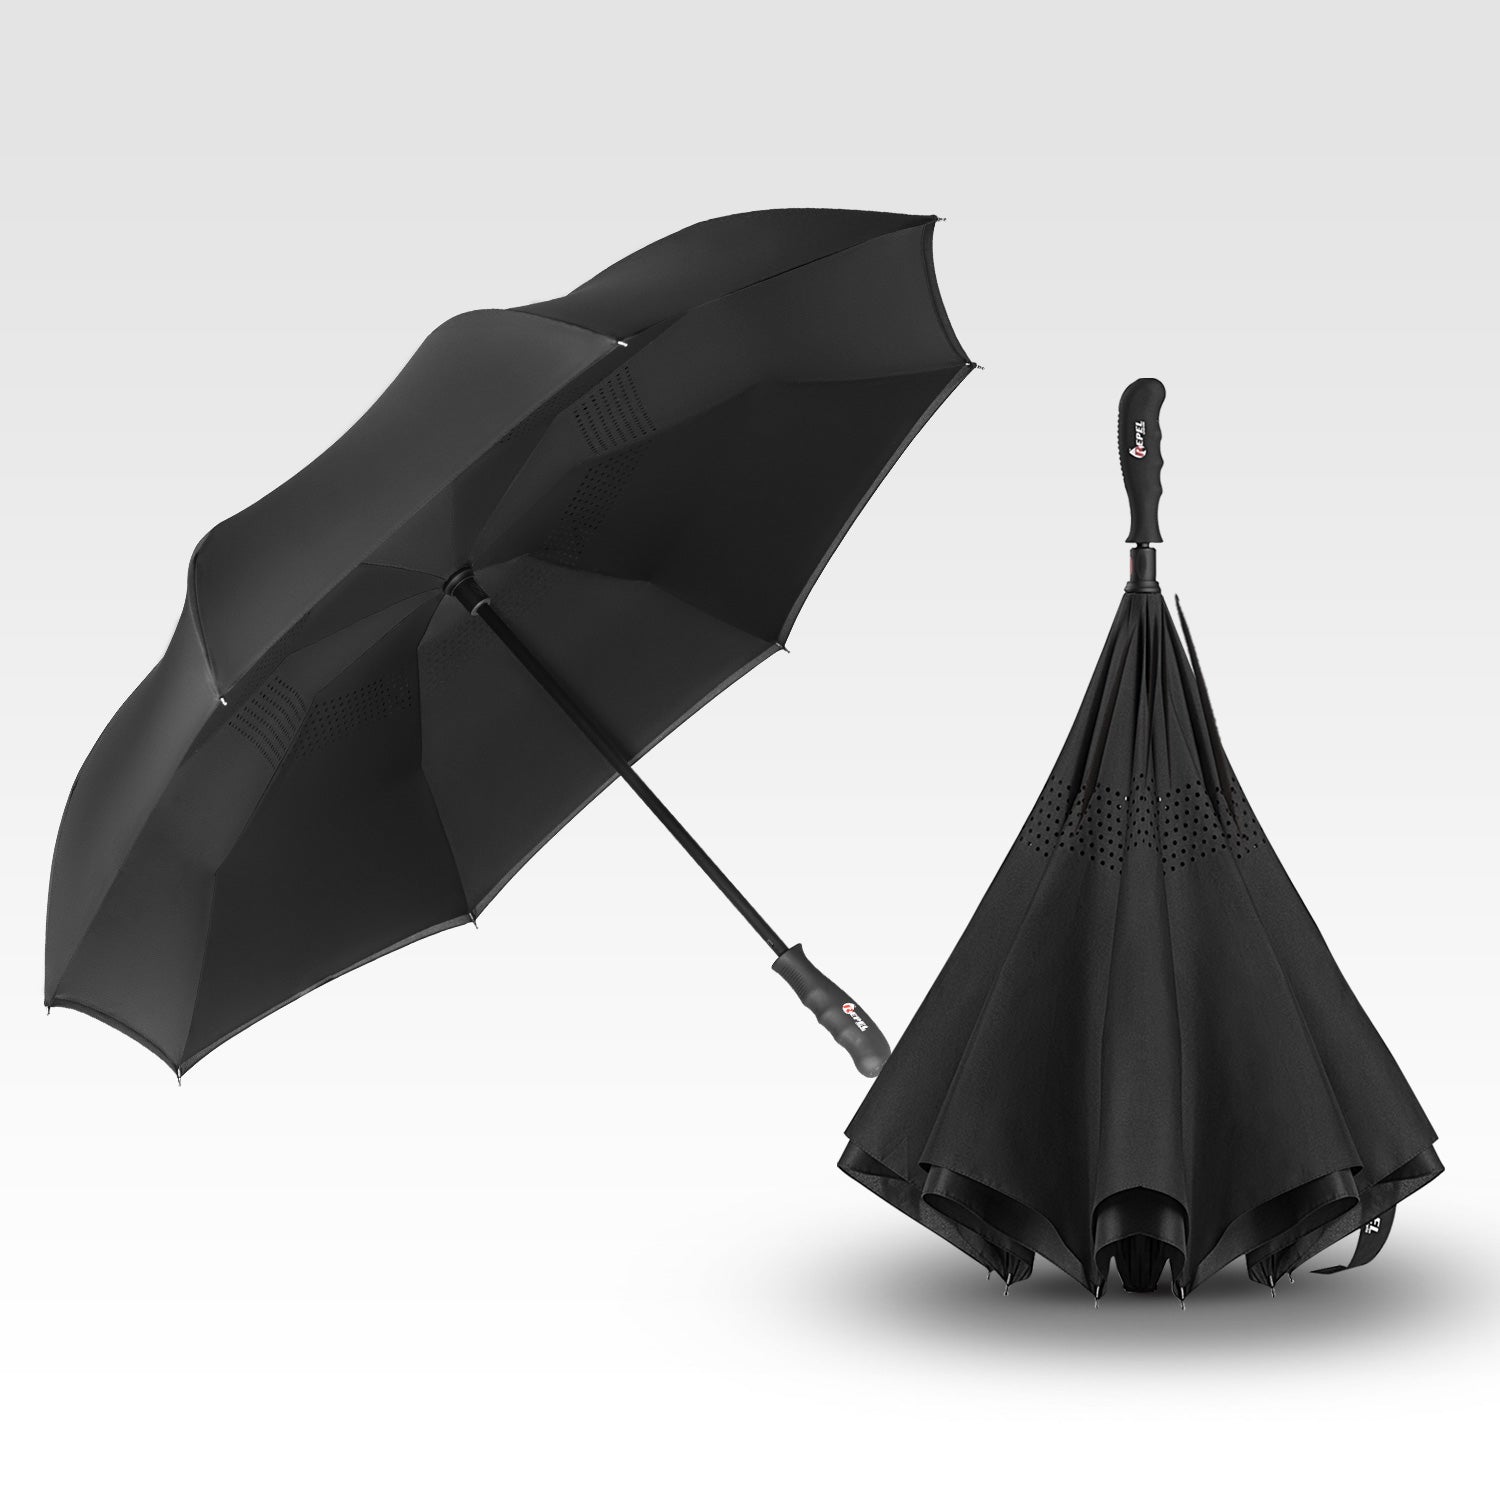 Why The Repel Inverted Umbrella Will Be The Last Umbrella You Ever Buy